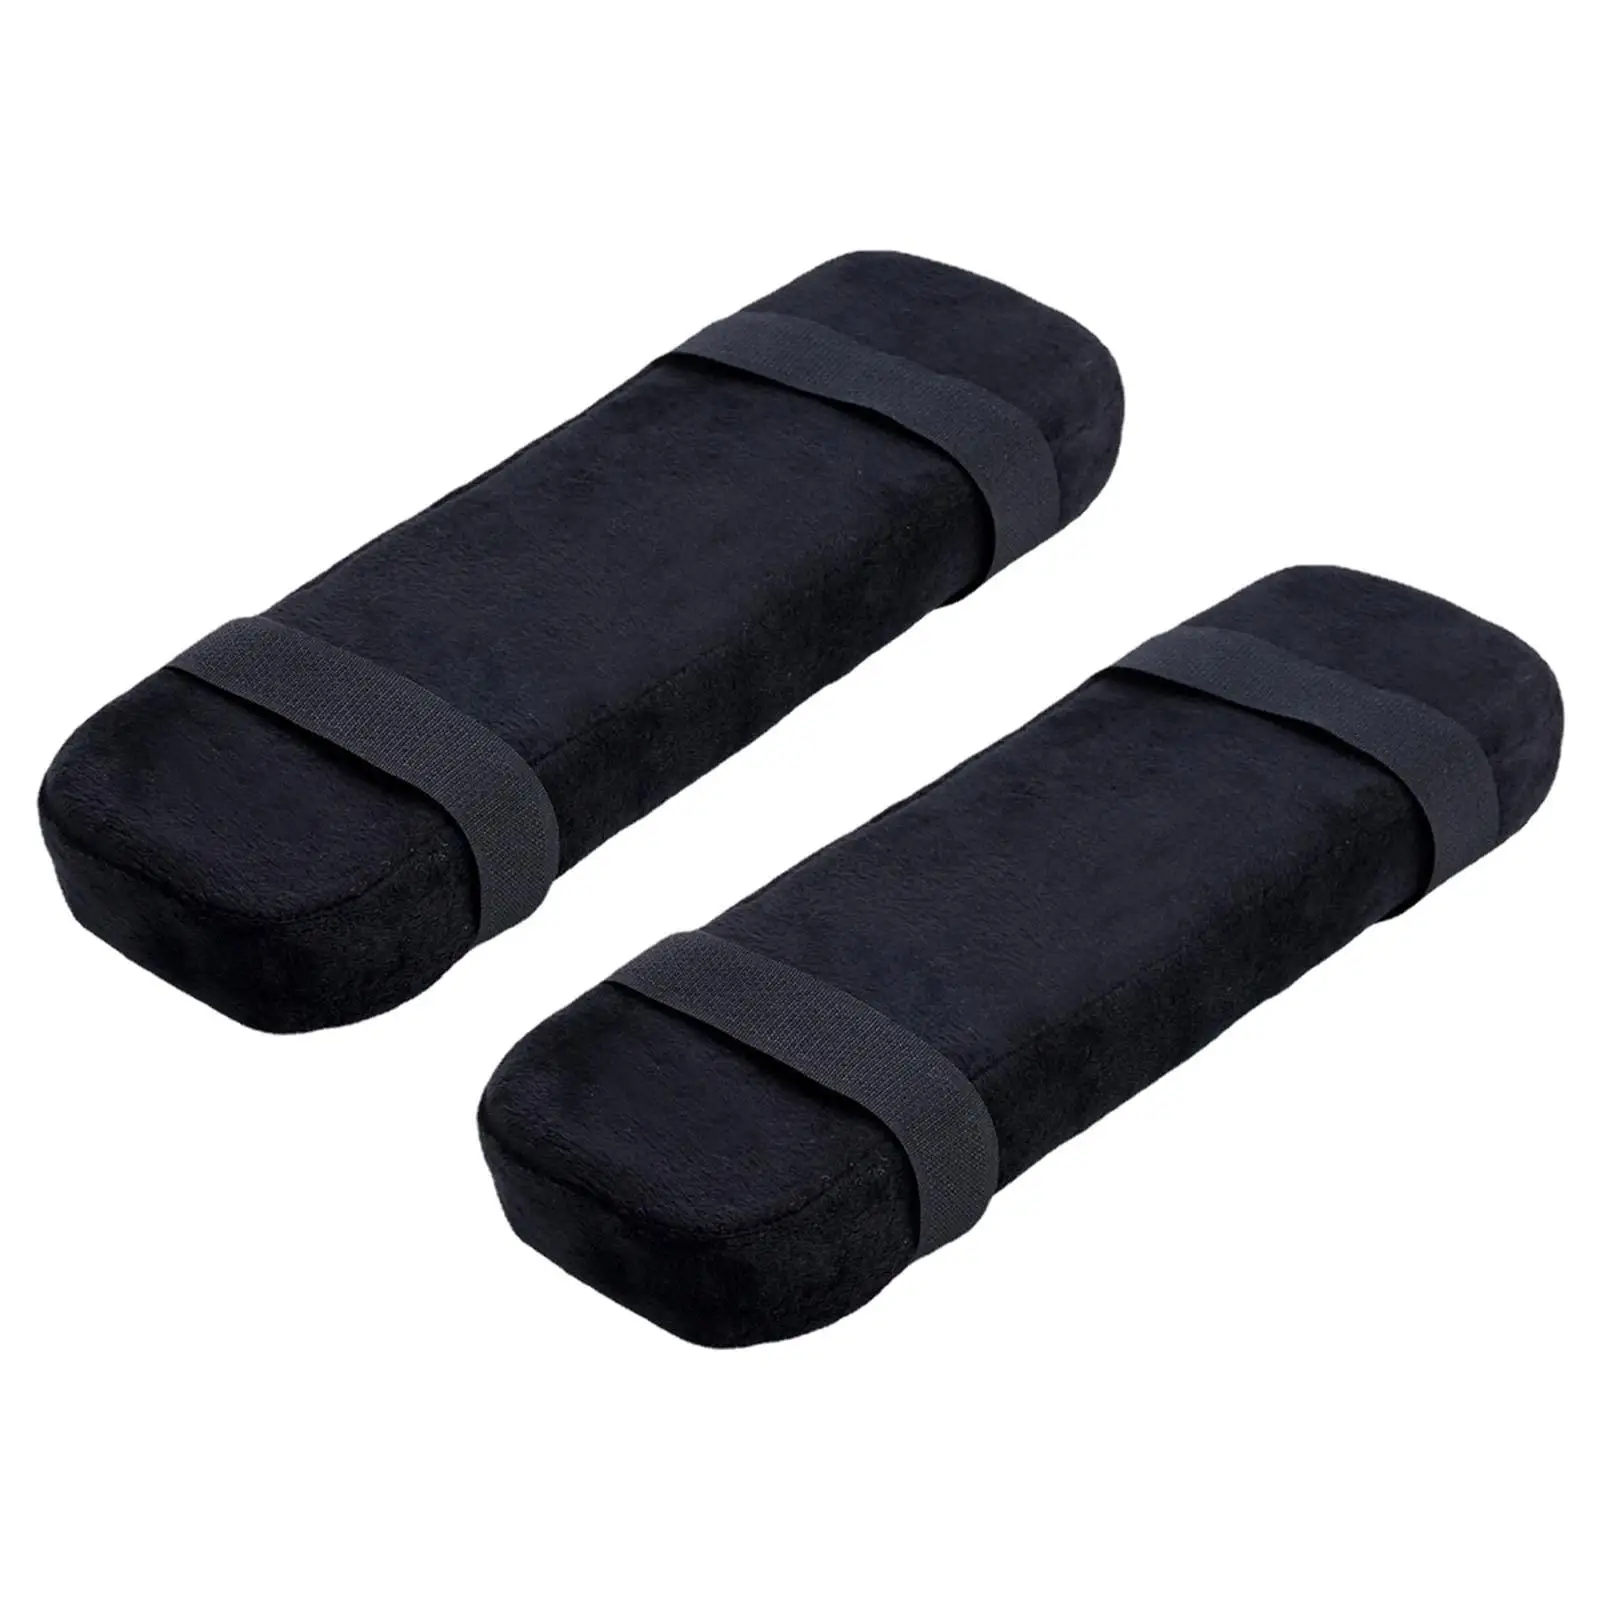 Portable Armrest Pad Pressure Relief Washable Comfort Arm Pad Arm Rest Cushion Elbow  for Gaming Chair Office Sleeping